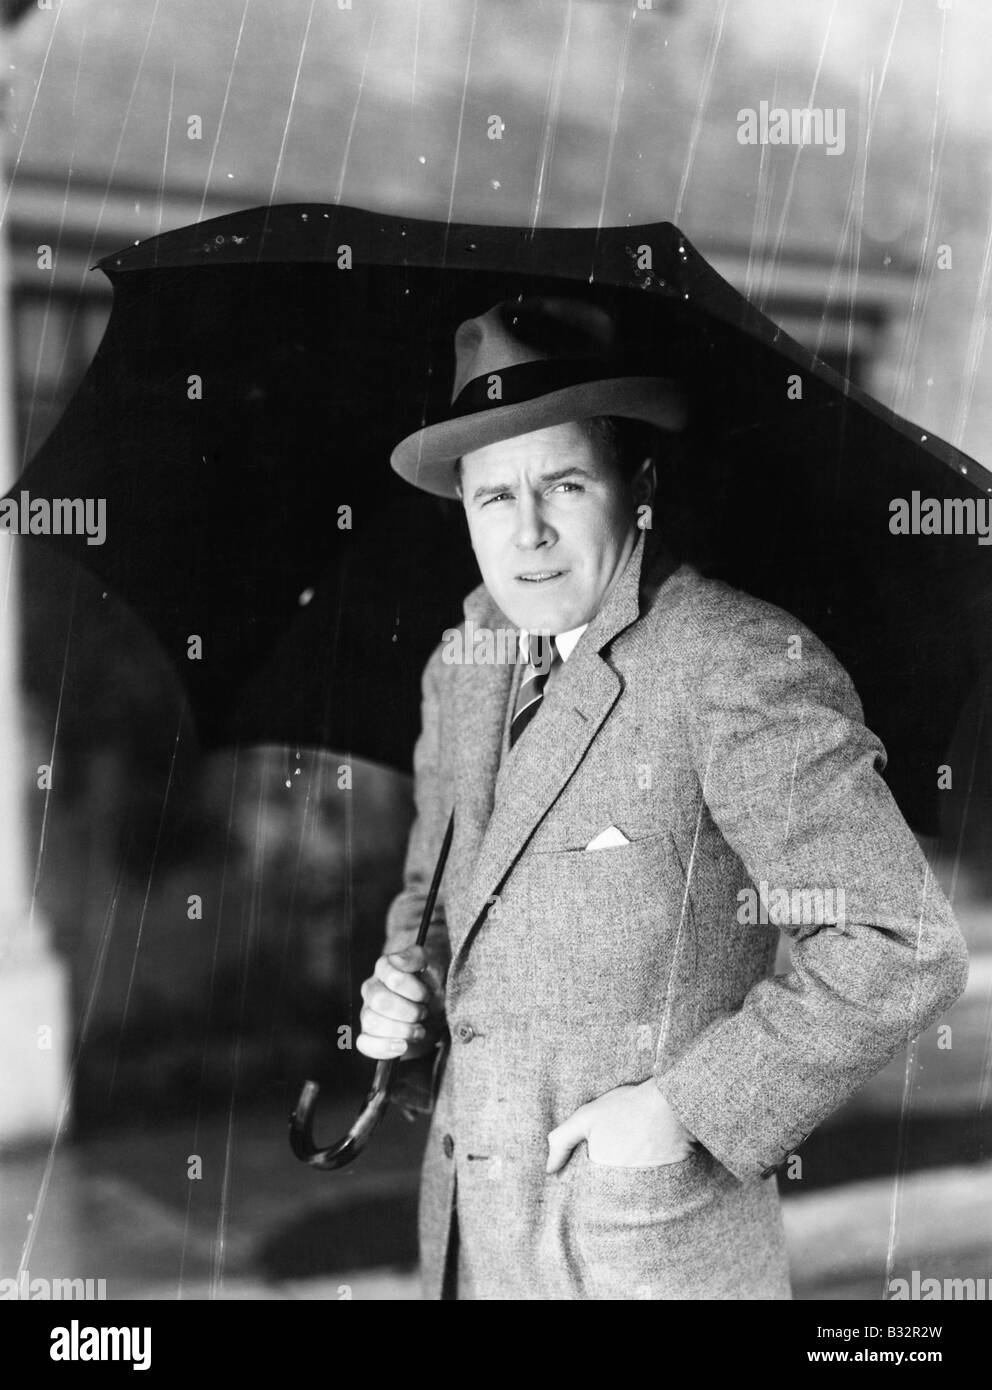 Man with an umbrella standing in the rain Stock Photo